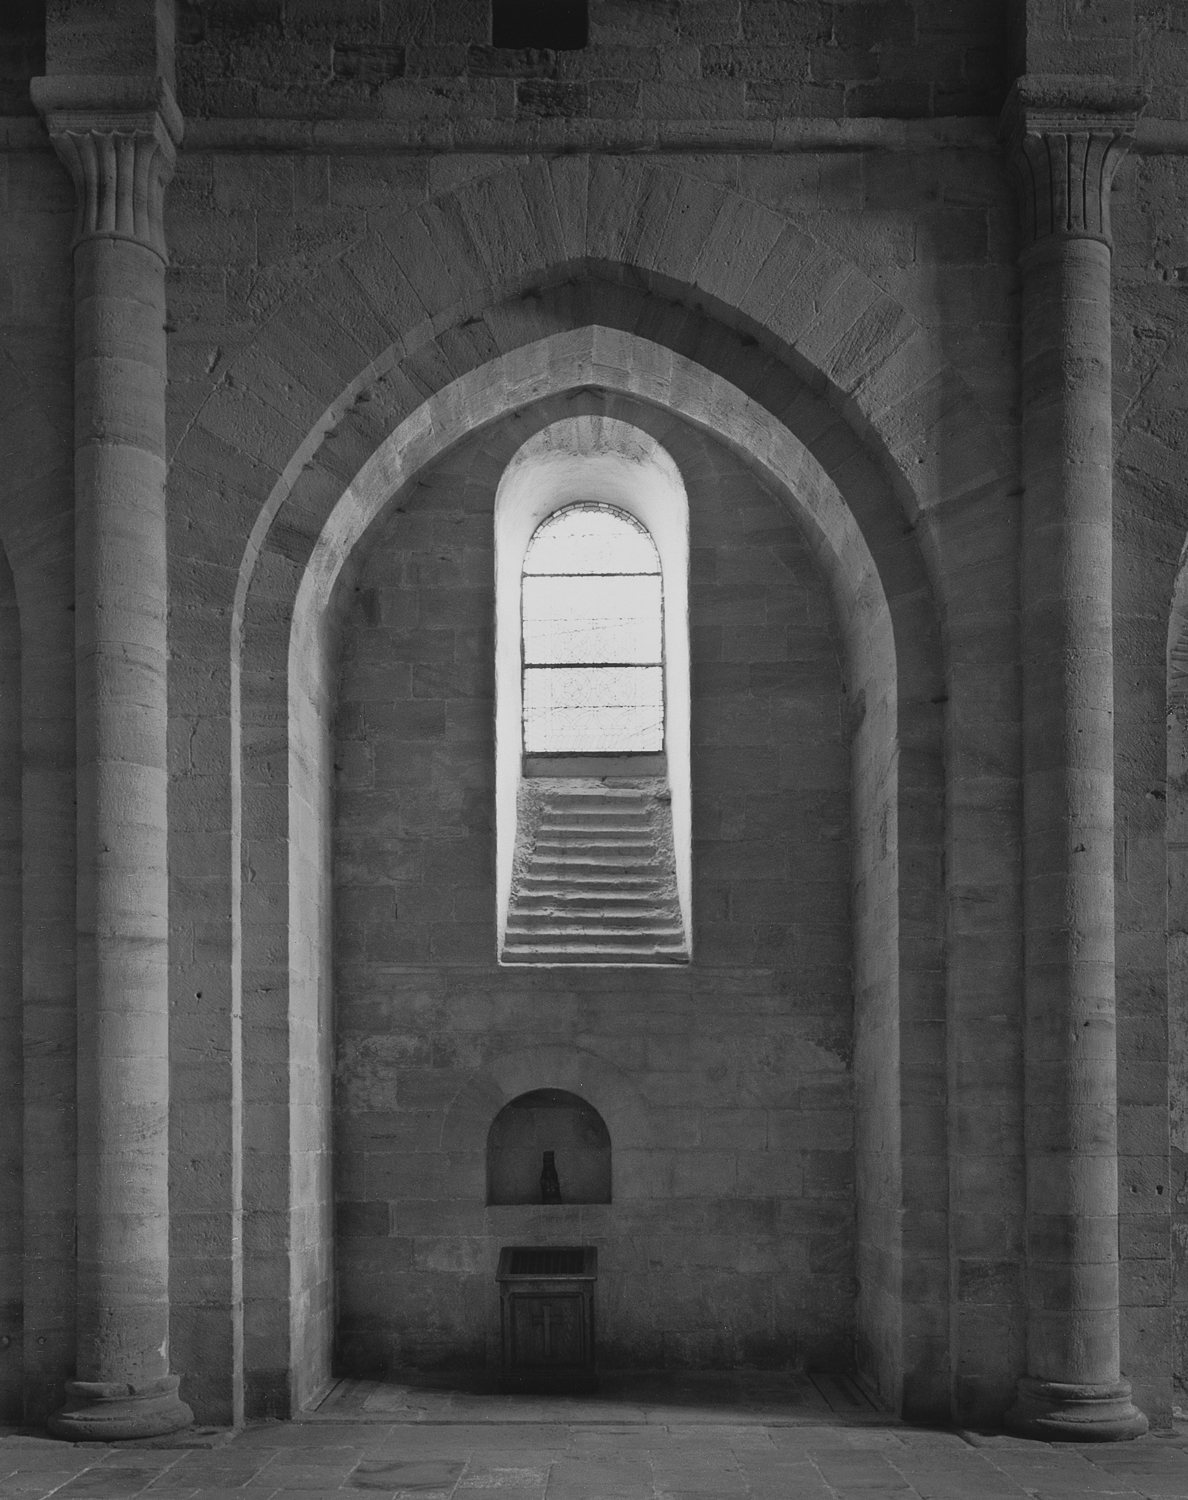 Chapel, South Side of Nave, Silvanes, 1995